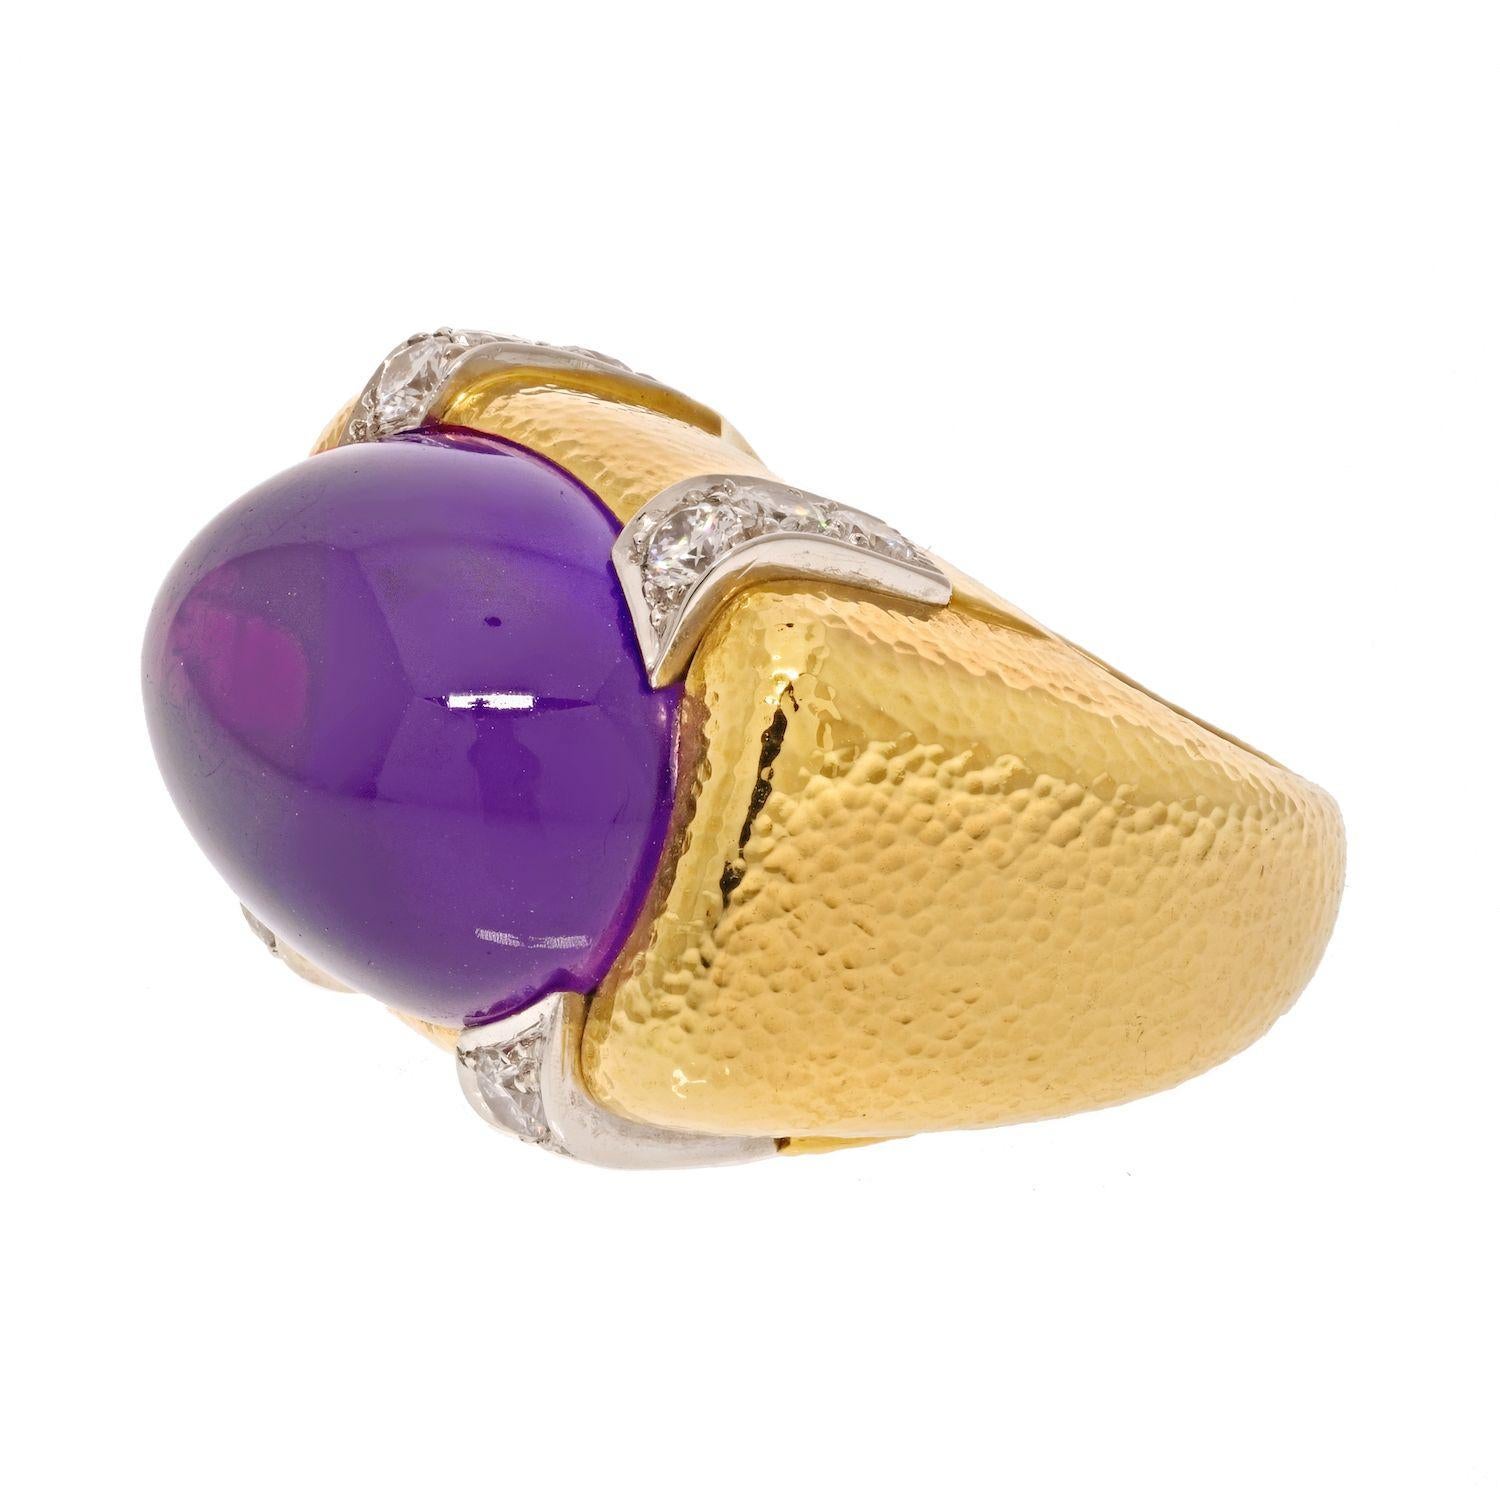 David Webb Platinum & 18K Yellow Gold Cabochon Amethyst And Diamond Cocktail Ring.

Centering a large cabochon amethyst mounted East to West held by the bezel, accented with round cut diamonds in four corners. Vibrant purple color of amethyst,